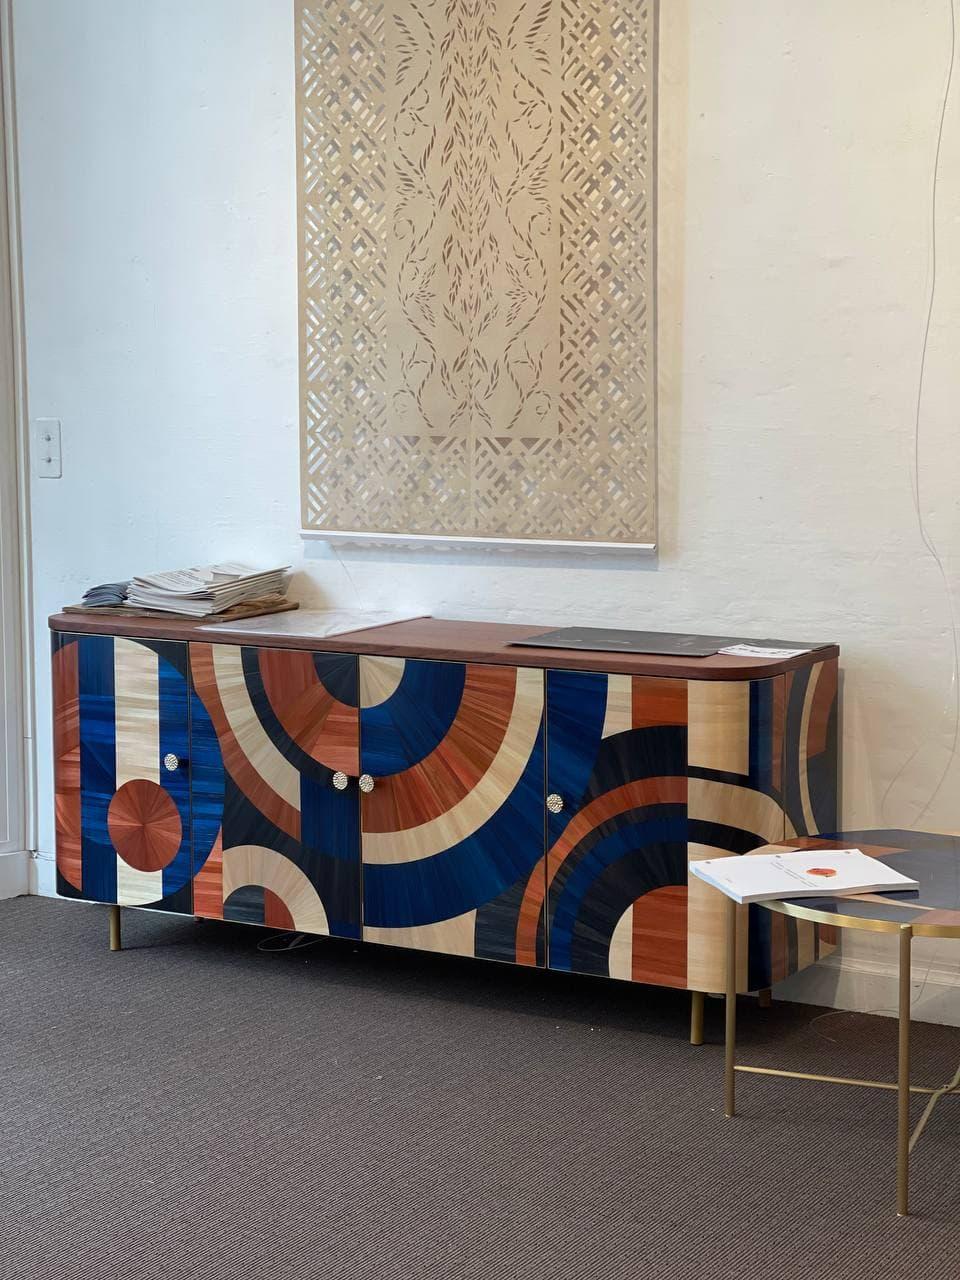 READY TO SHIP Solomia Straw marquetry Art Deco wood cabinet by RUDA Studio. 
The item was exhibited at Paris Design Week 2021.

The cabinet Solomia is inspired by the fertility of our land. The ornament is made in the ancient straw marquetry